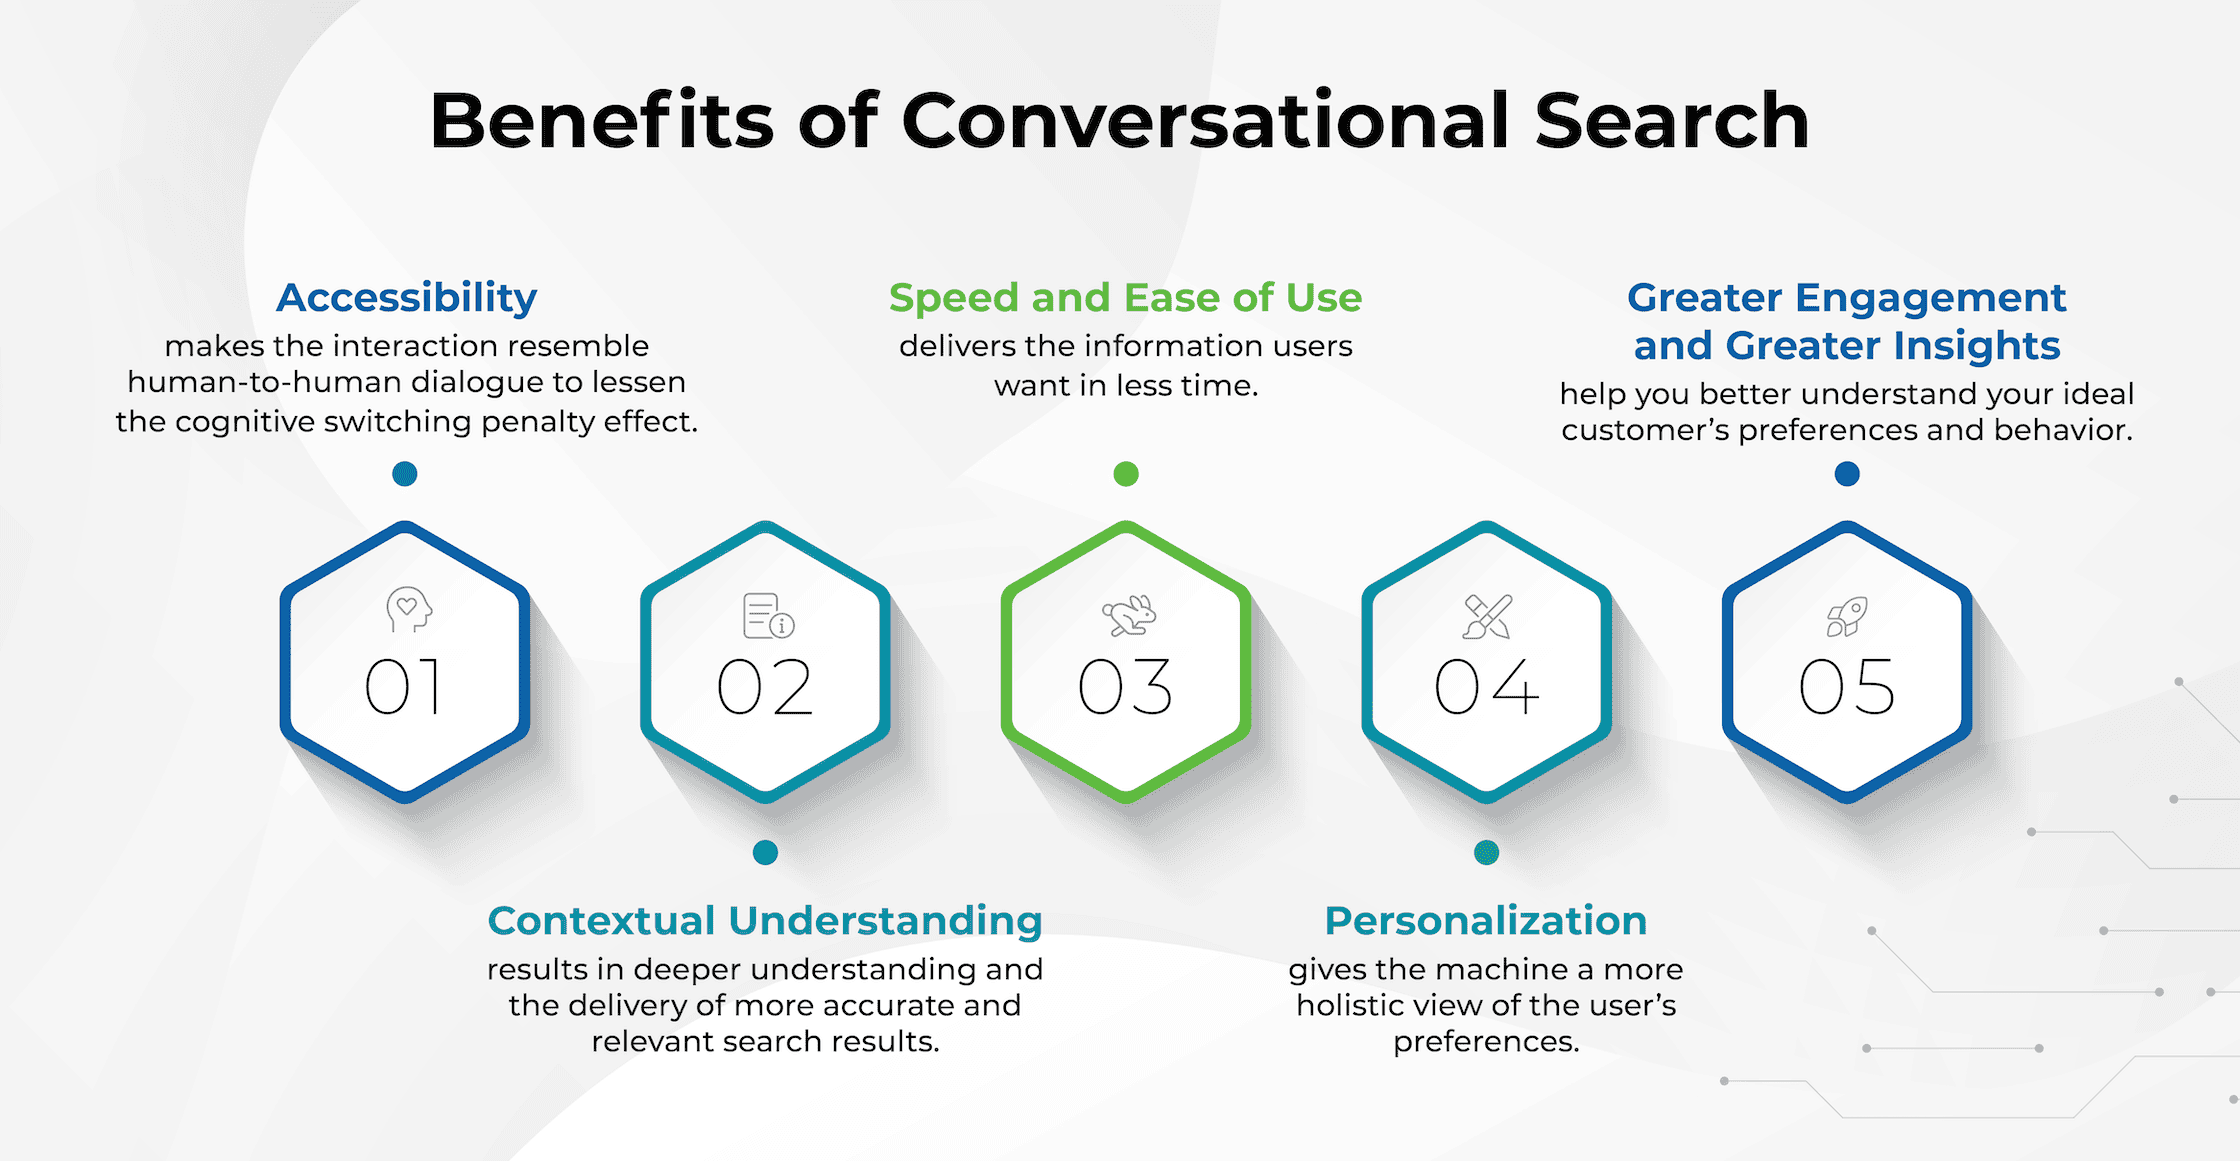 Benefits of Conversational Search